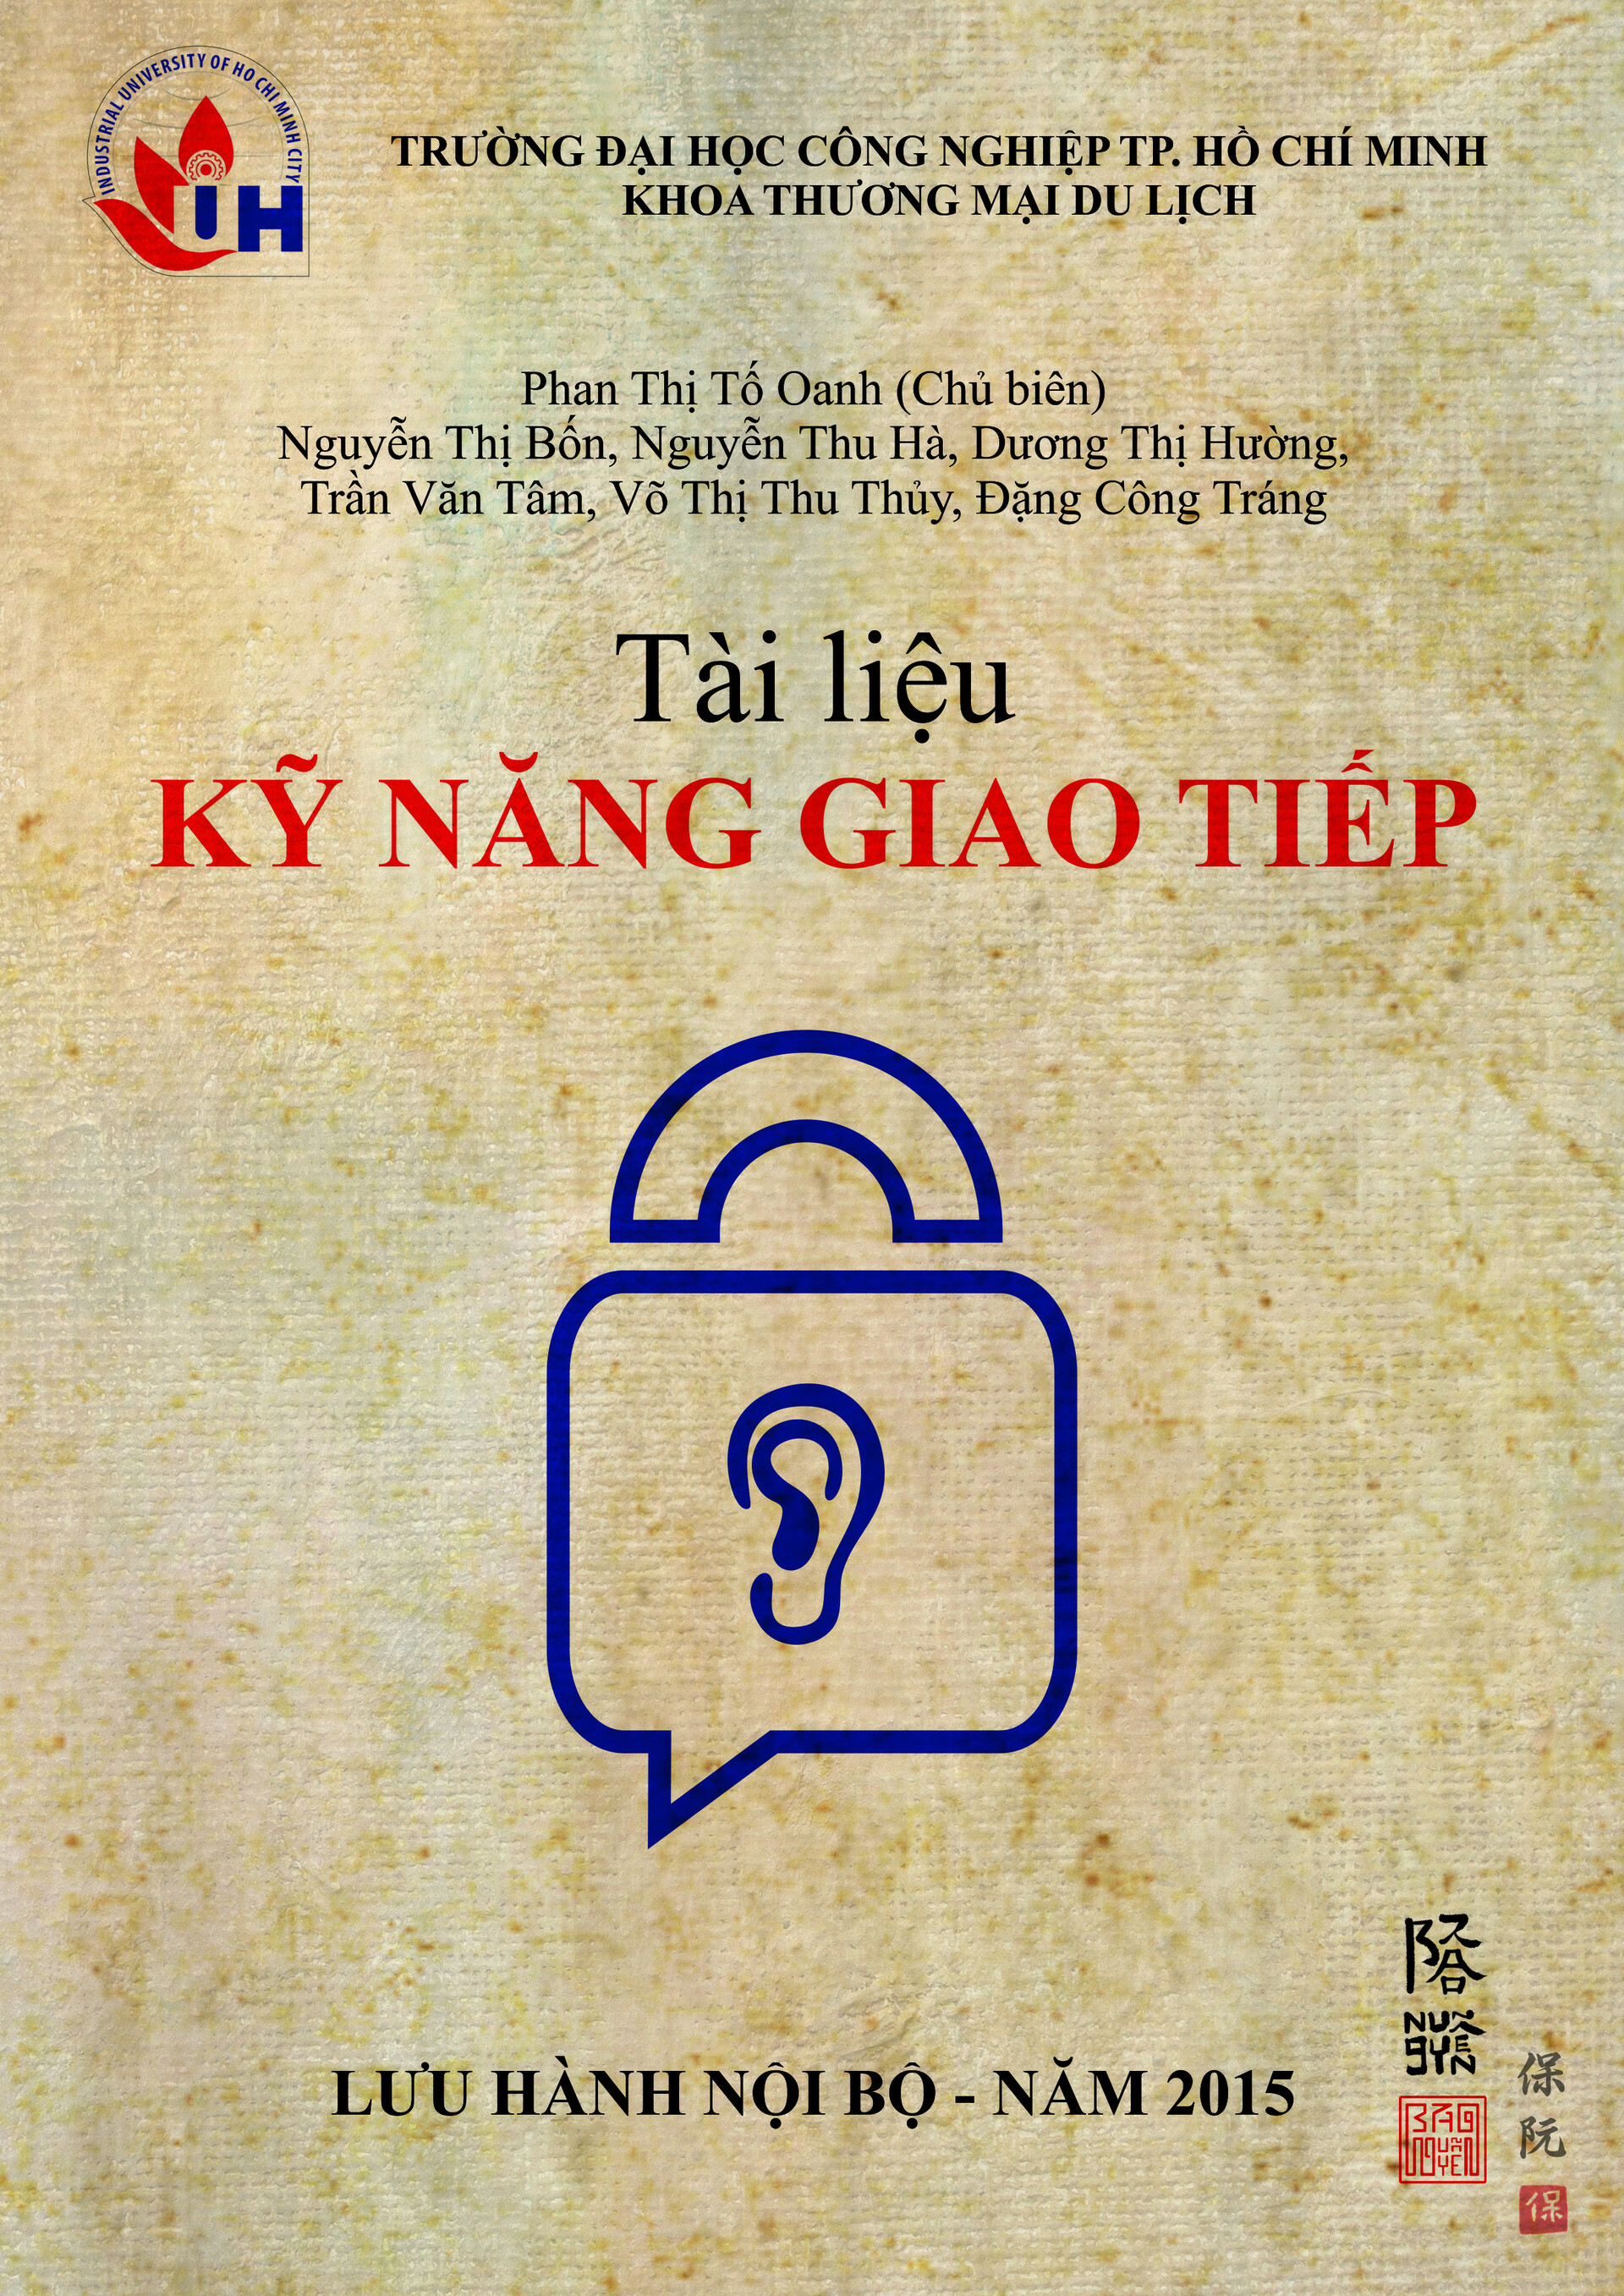 Bảo Nguyễn 保阮 06 Communication Skills Free Book Cover Made For Rich University Bao Nguyen